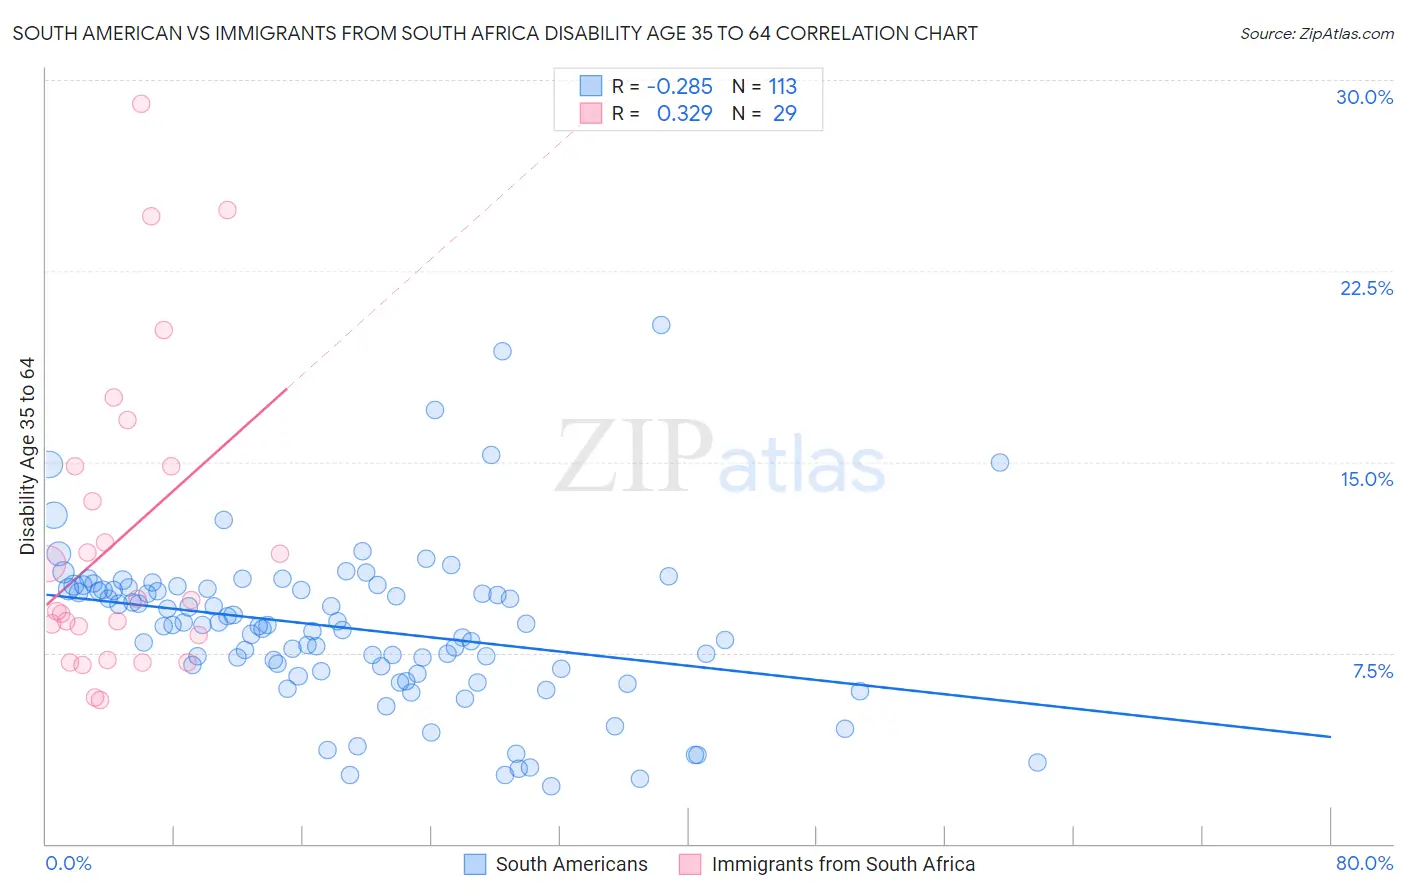 South American vs Immigrants from South Africa Disability Age 35 to 64